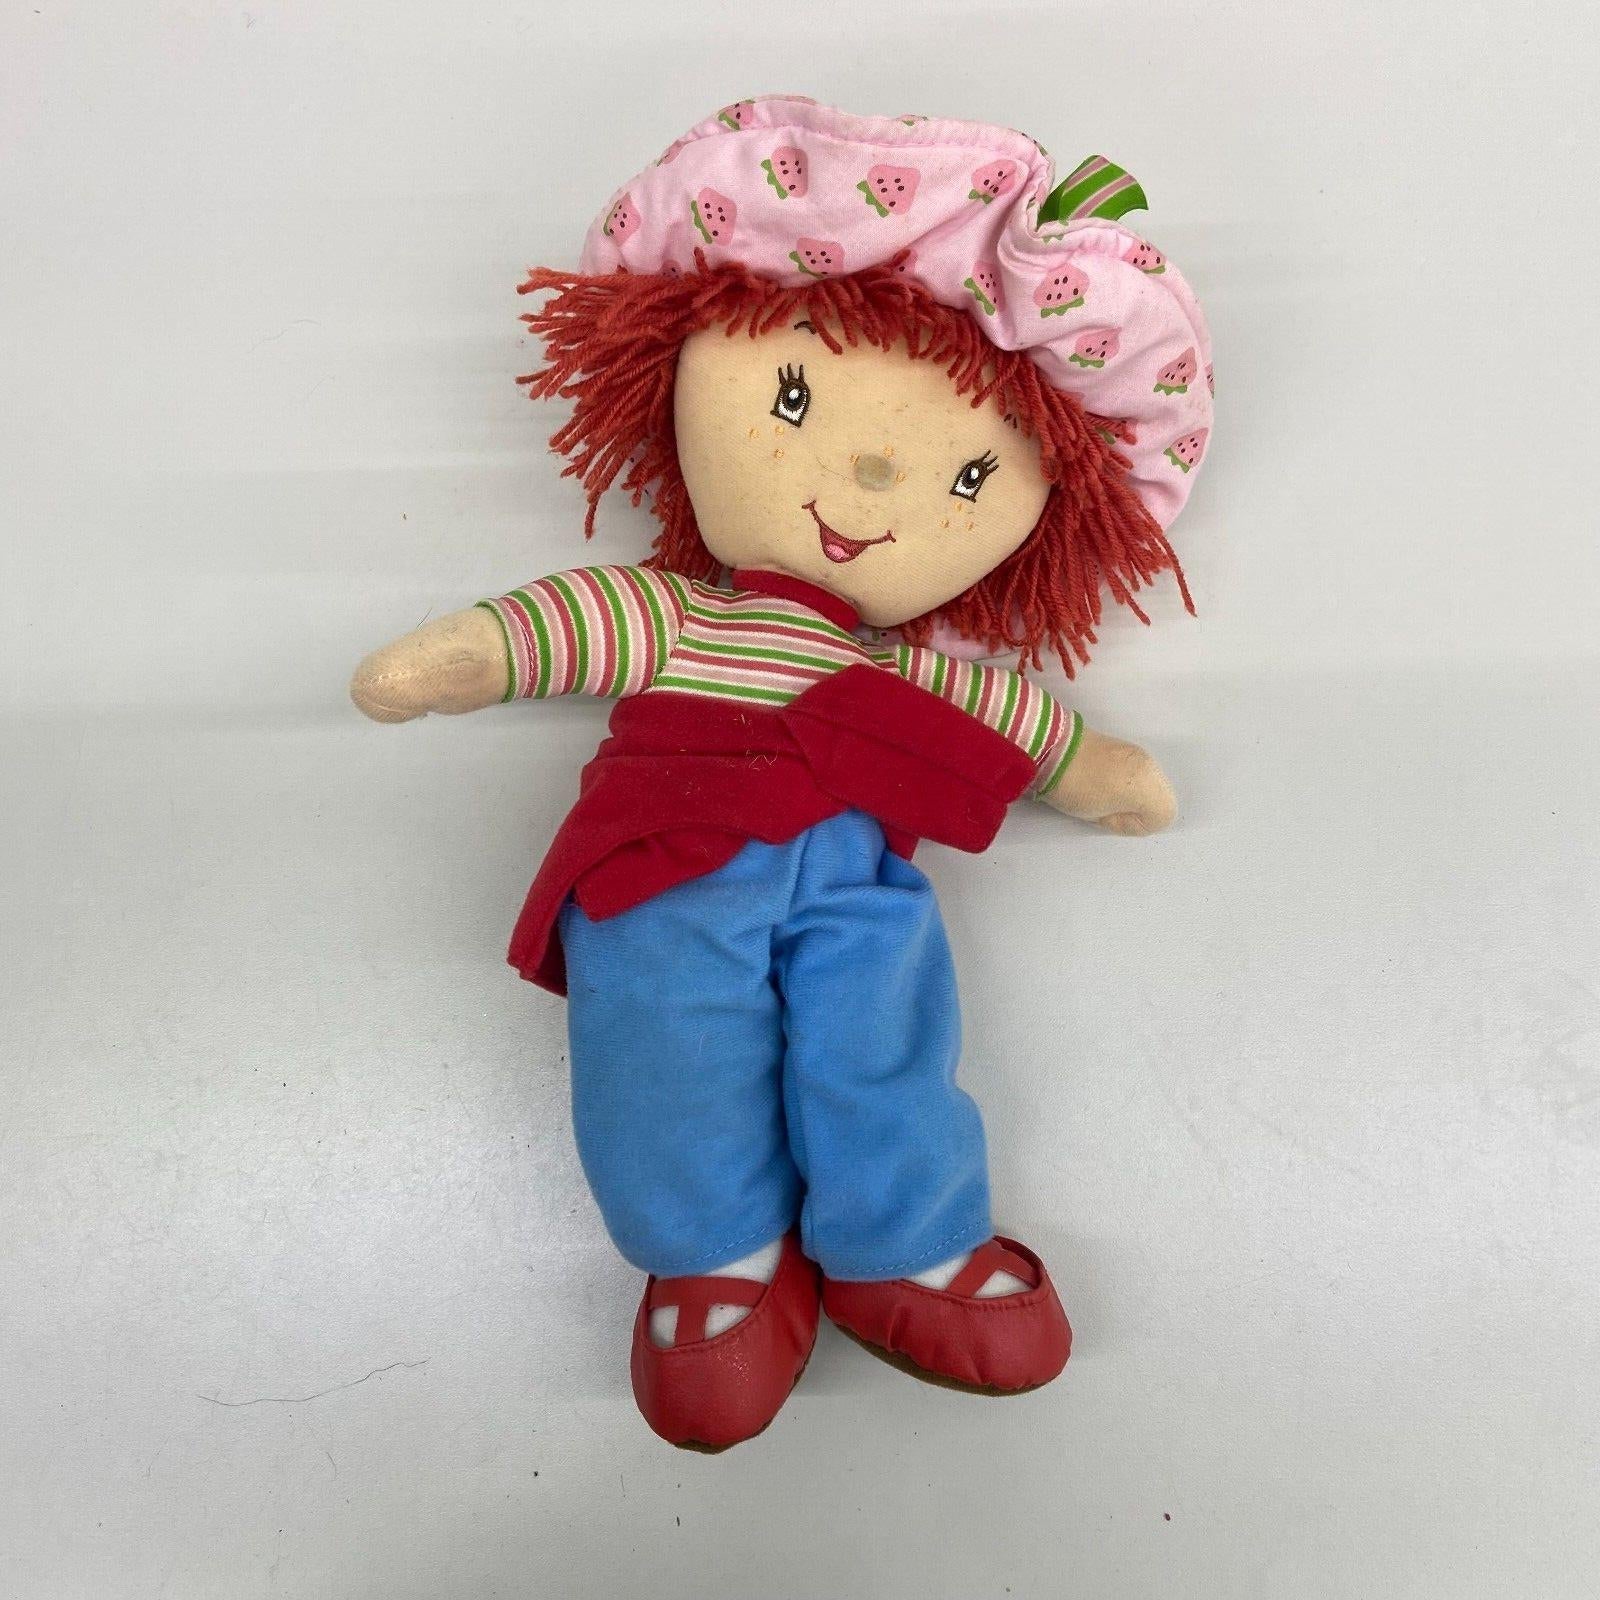 LOT of 3 Strawberry Shortcake Cute Plush Toy Doll Figures Used